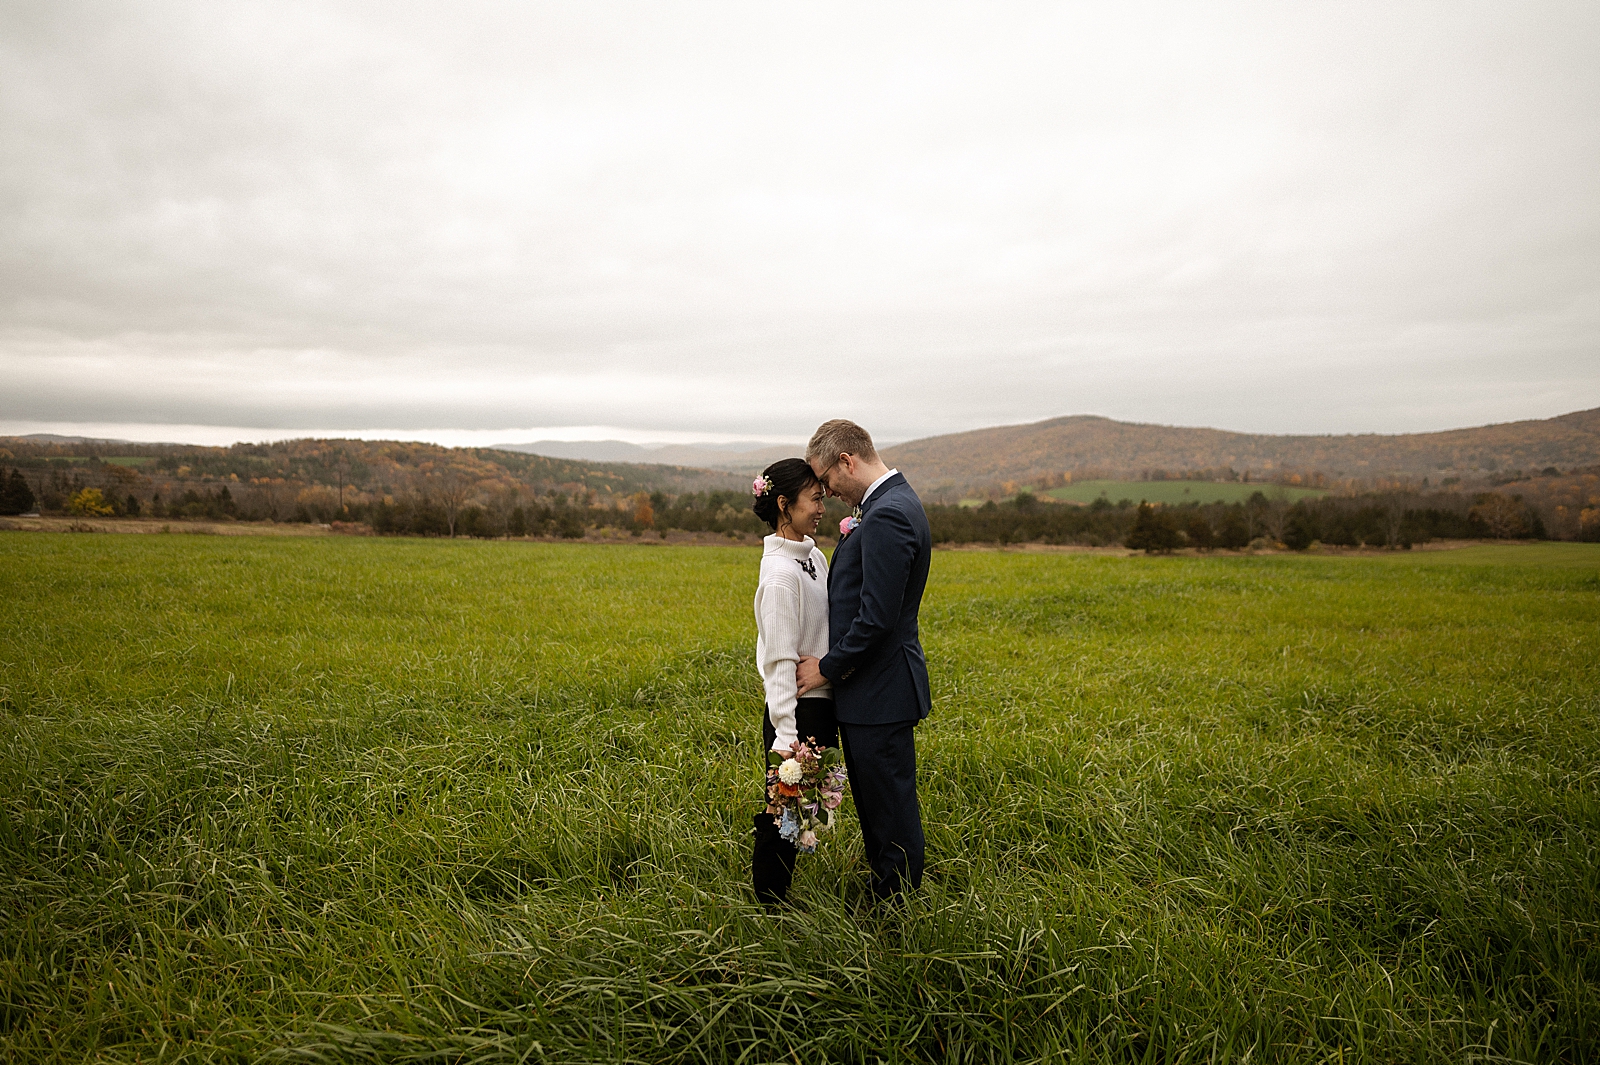 Bride and Groom resting their heads against each other on tall grassy field